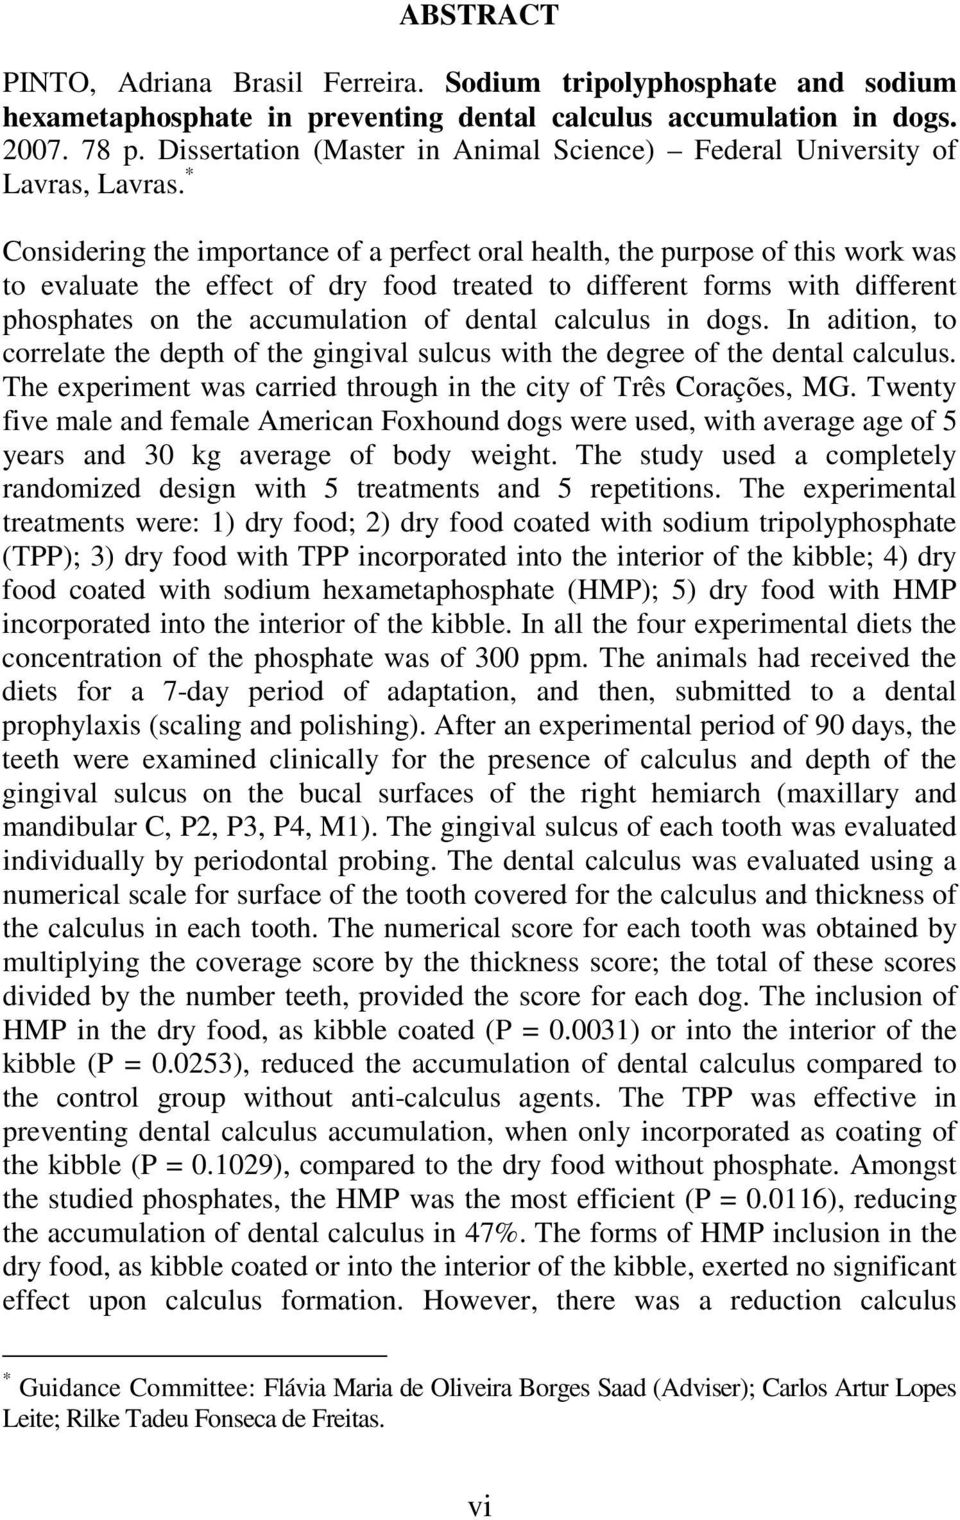 * Considering the importance of a perfect oral health, the purpose of this work was to evaluate the effect of dry food treated to different forms with different phosphates on the accumulation of